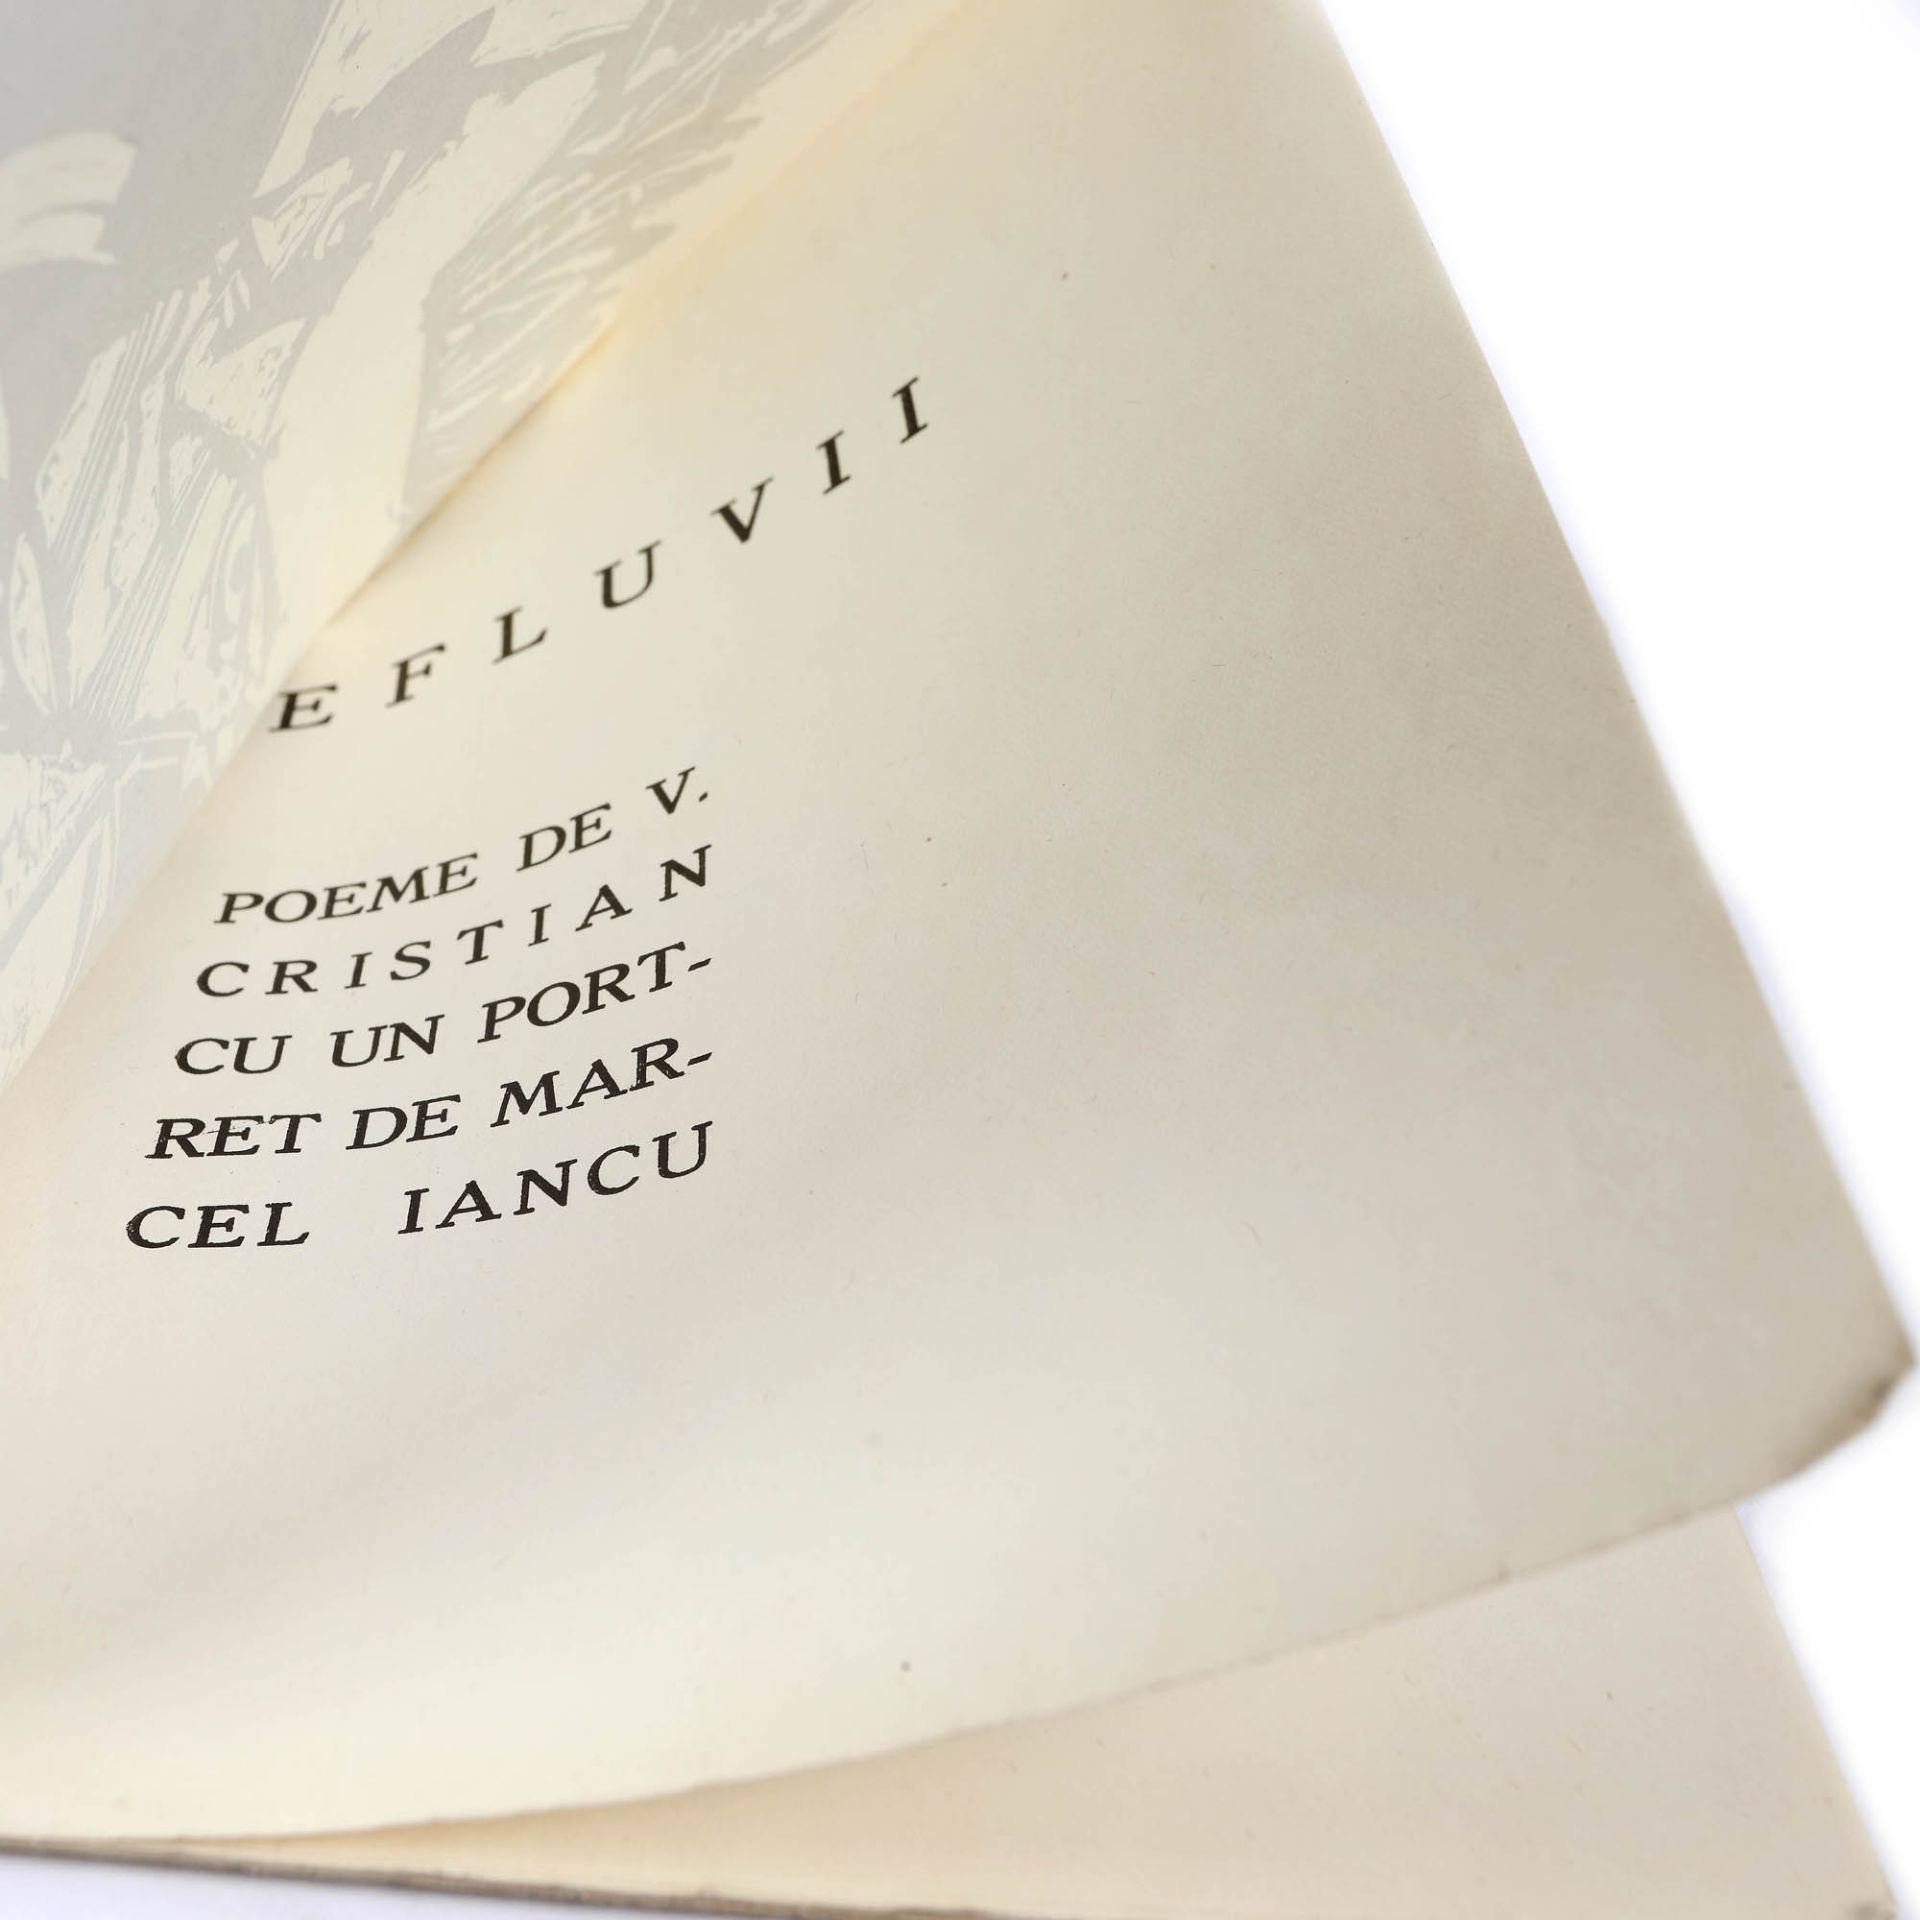 "Efluvii" ("Effluvia"), by V. Cristian, Bucharest, with a drawing by Marcel Iancu and the author's d - Bild 3 aus 4